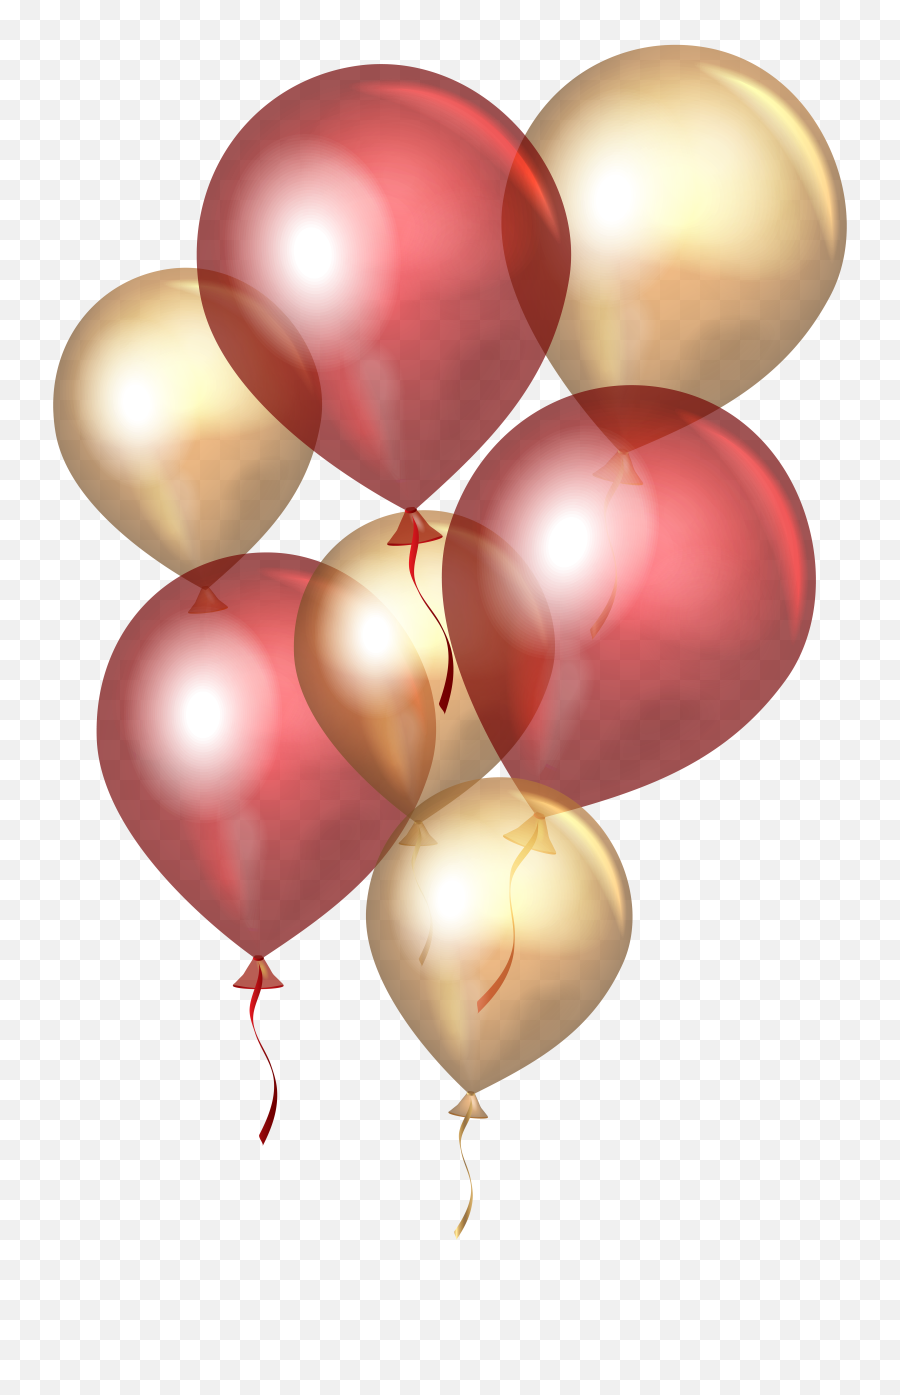 Transparent Red Balloons Png Clip Art - Transparent Gold Balloons Png,Balloons Transparent